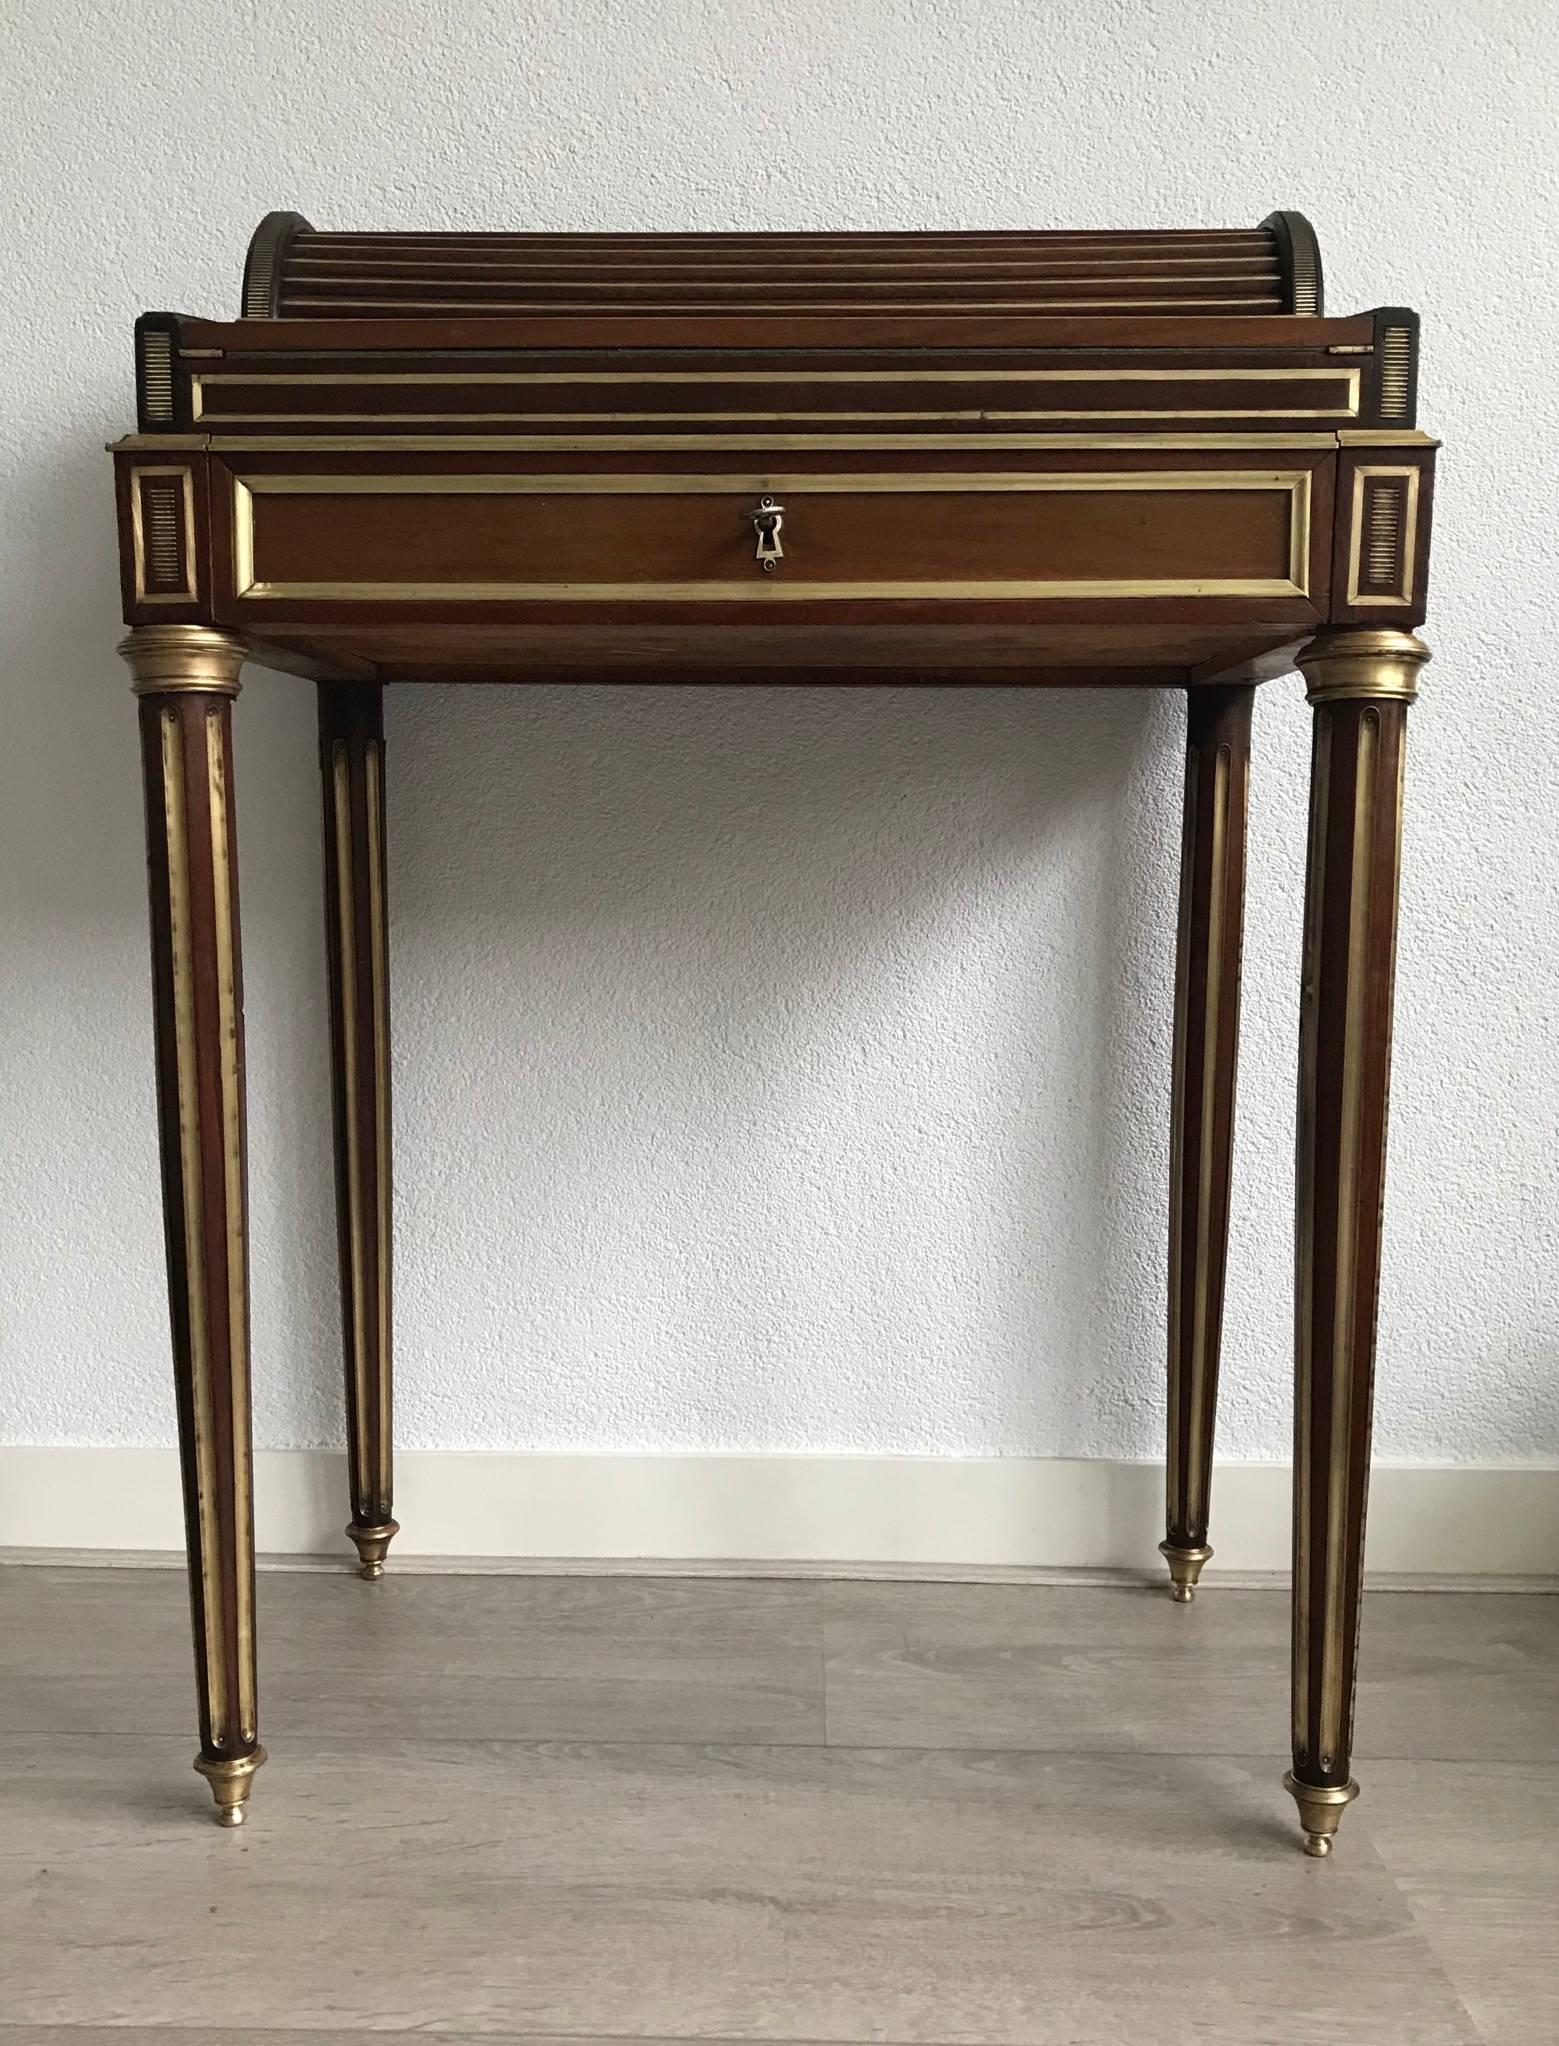 Fine quality and stunning design Louis XVI style desk.

This wonderful antique ladies desk is supported by four elegant legs and turned brass feet. The over-all design and also the combination of the top quality mahogany and the stunning brass style